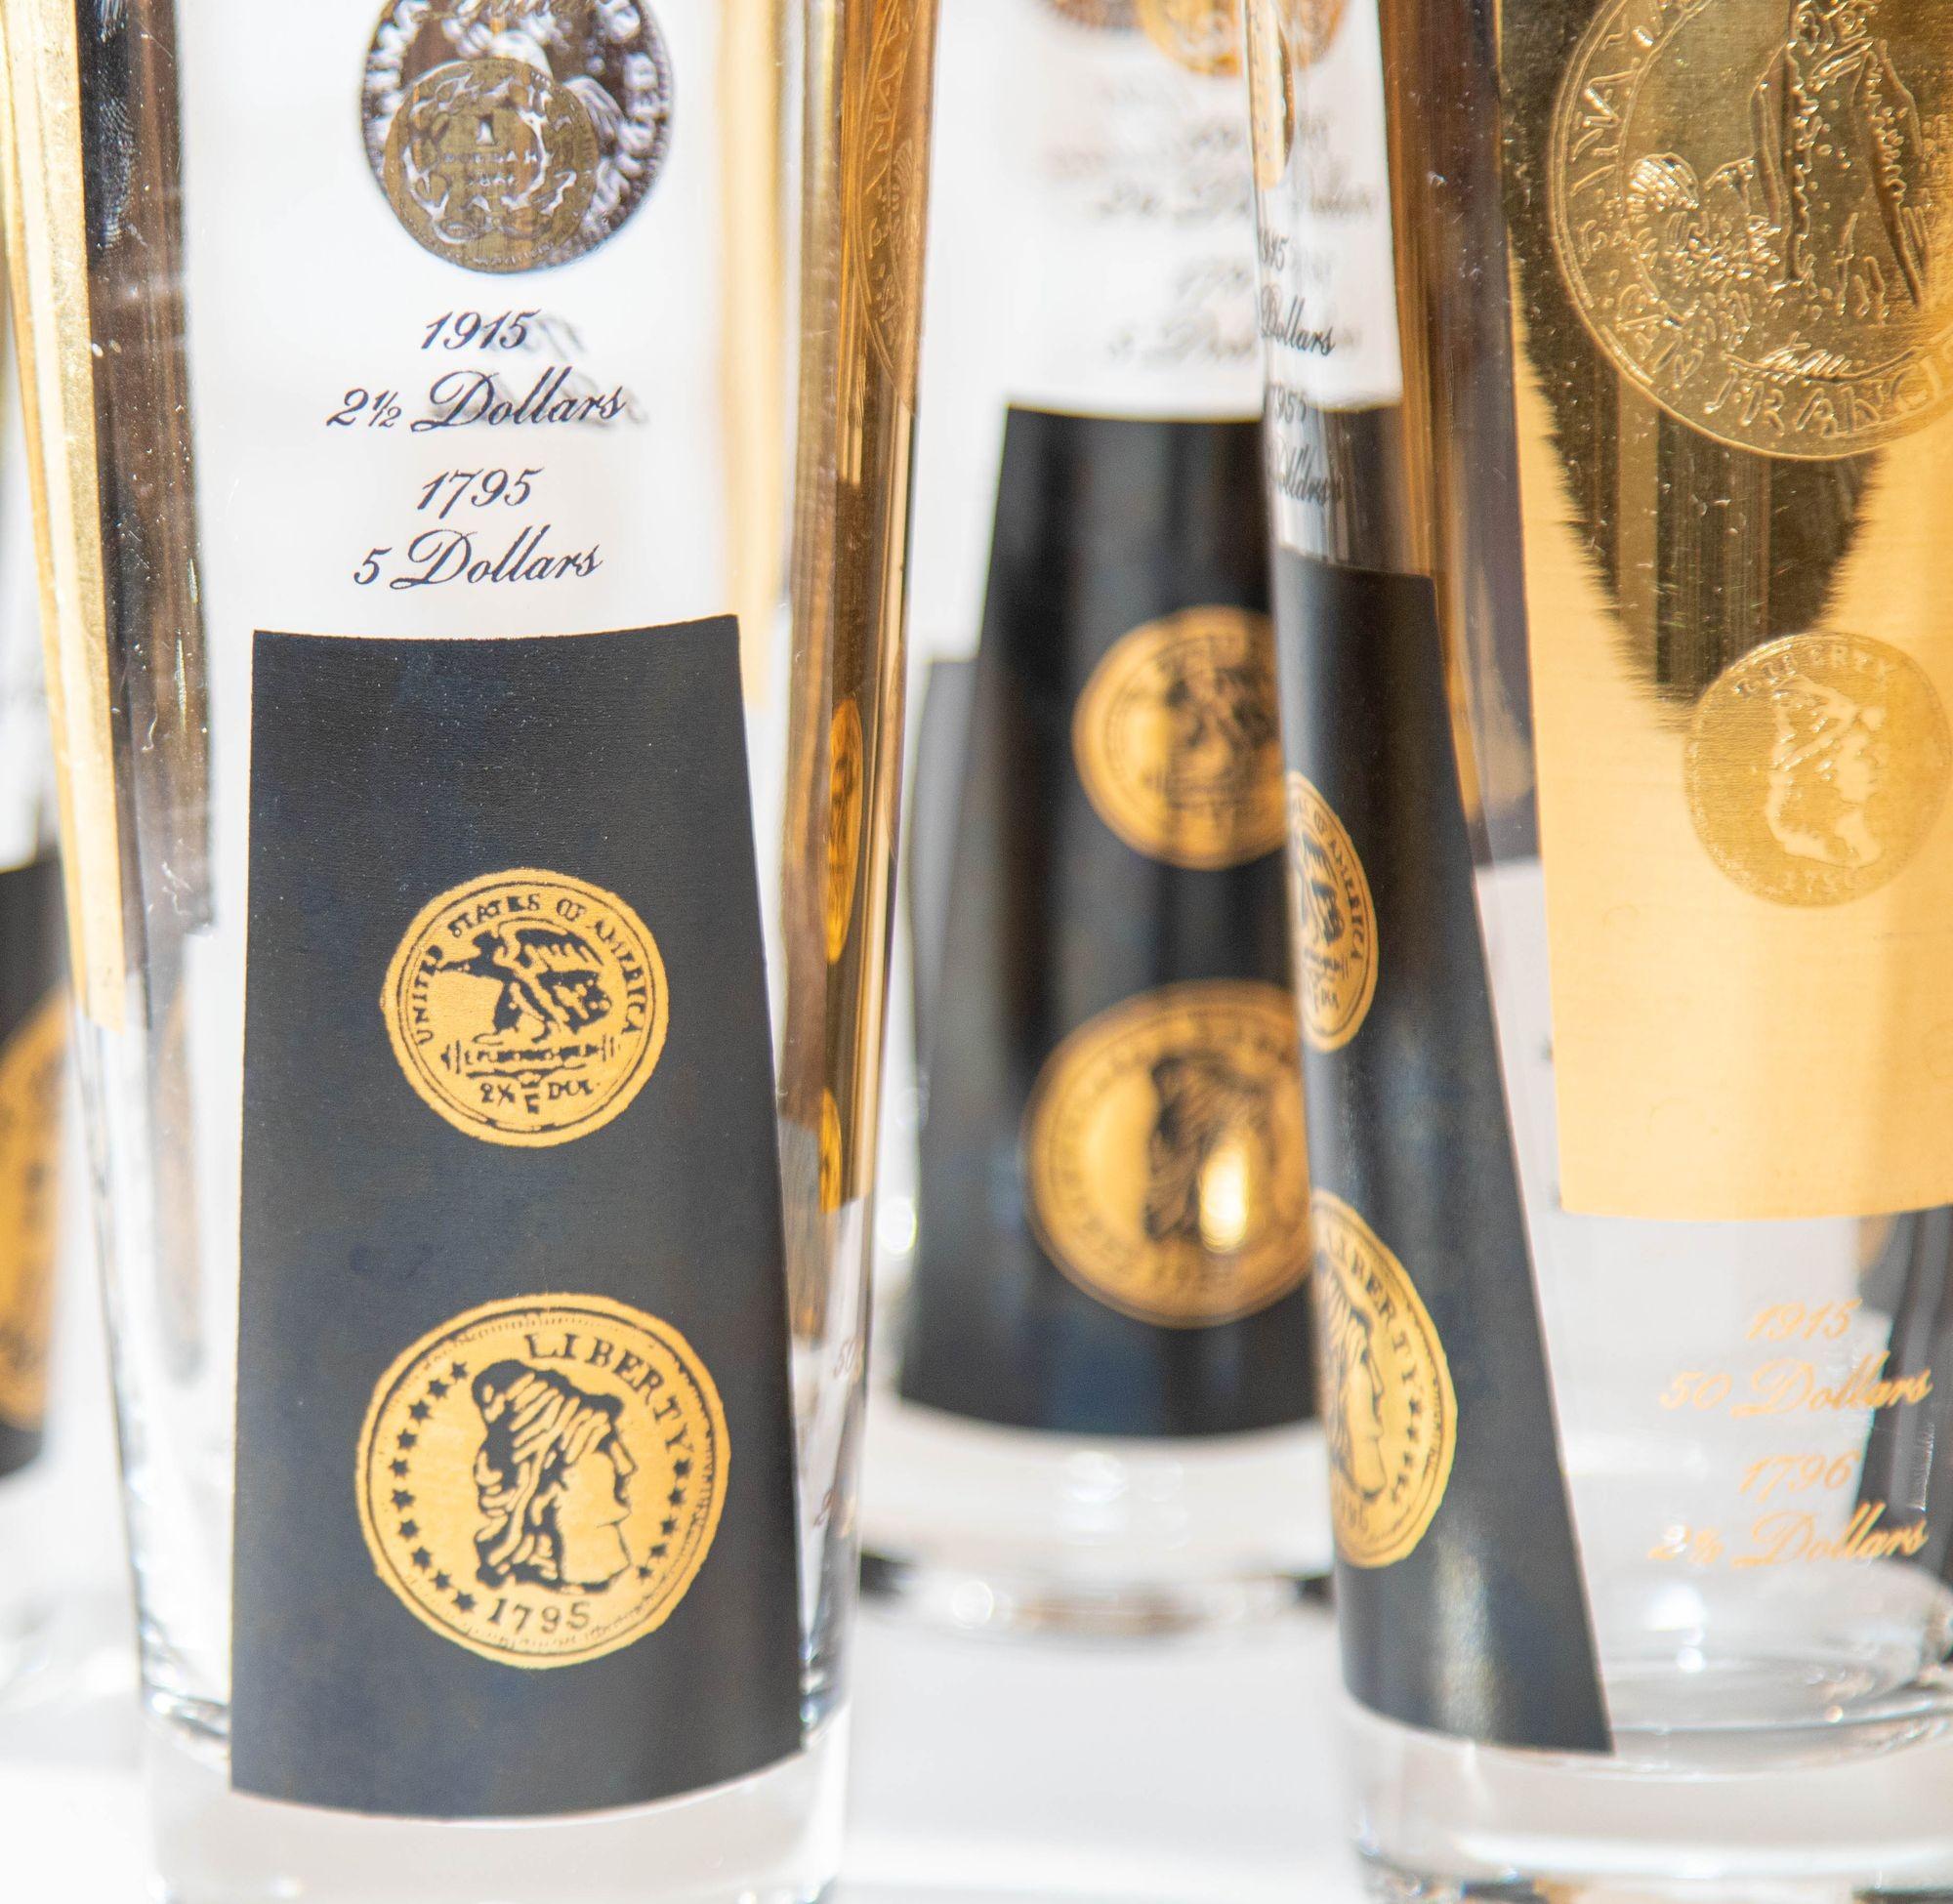 1960s Gold Printed Presidential Coins Highball Glasses Barware Set of 7.
Cera Black and Gold Highball Coin Glasses by Bob Wallack.
Midcentury vintage set of 7 pieces highball glasses 1960s gold printed presidential coins.
Set of 7 Cera 22-karat gold